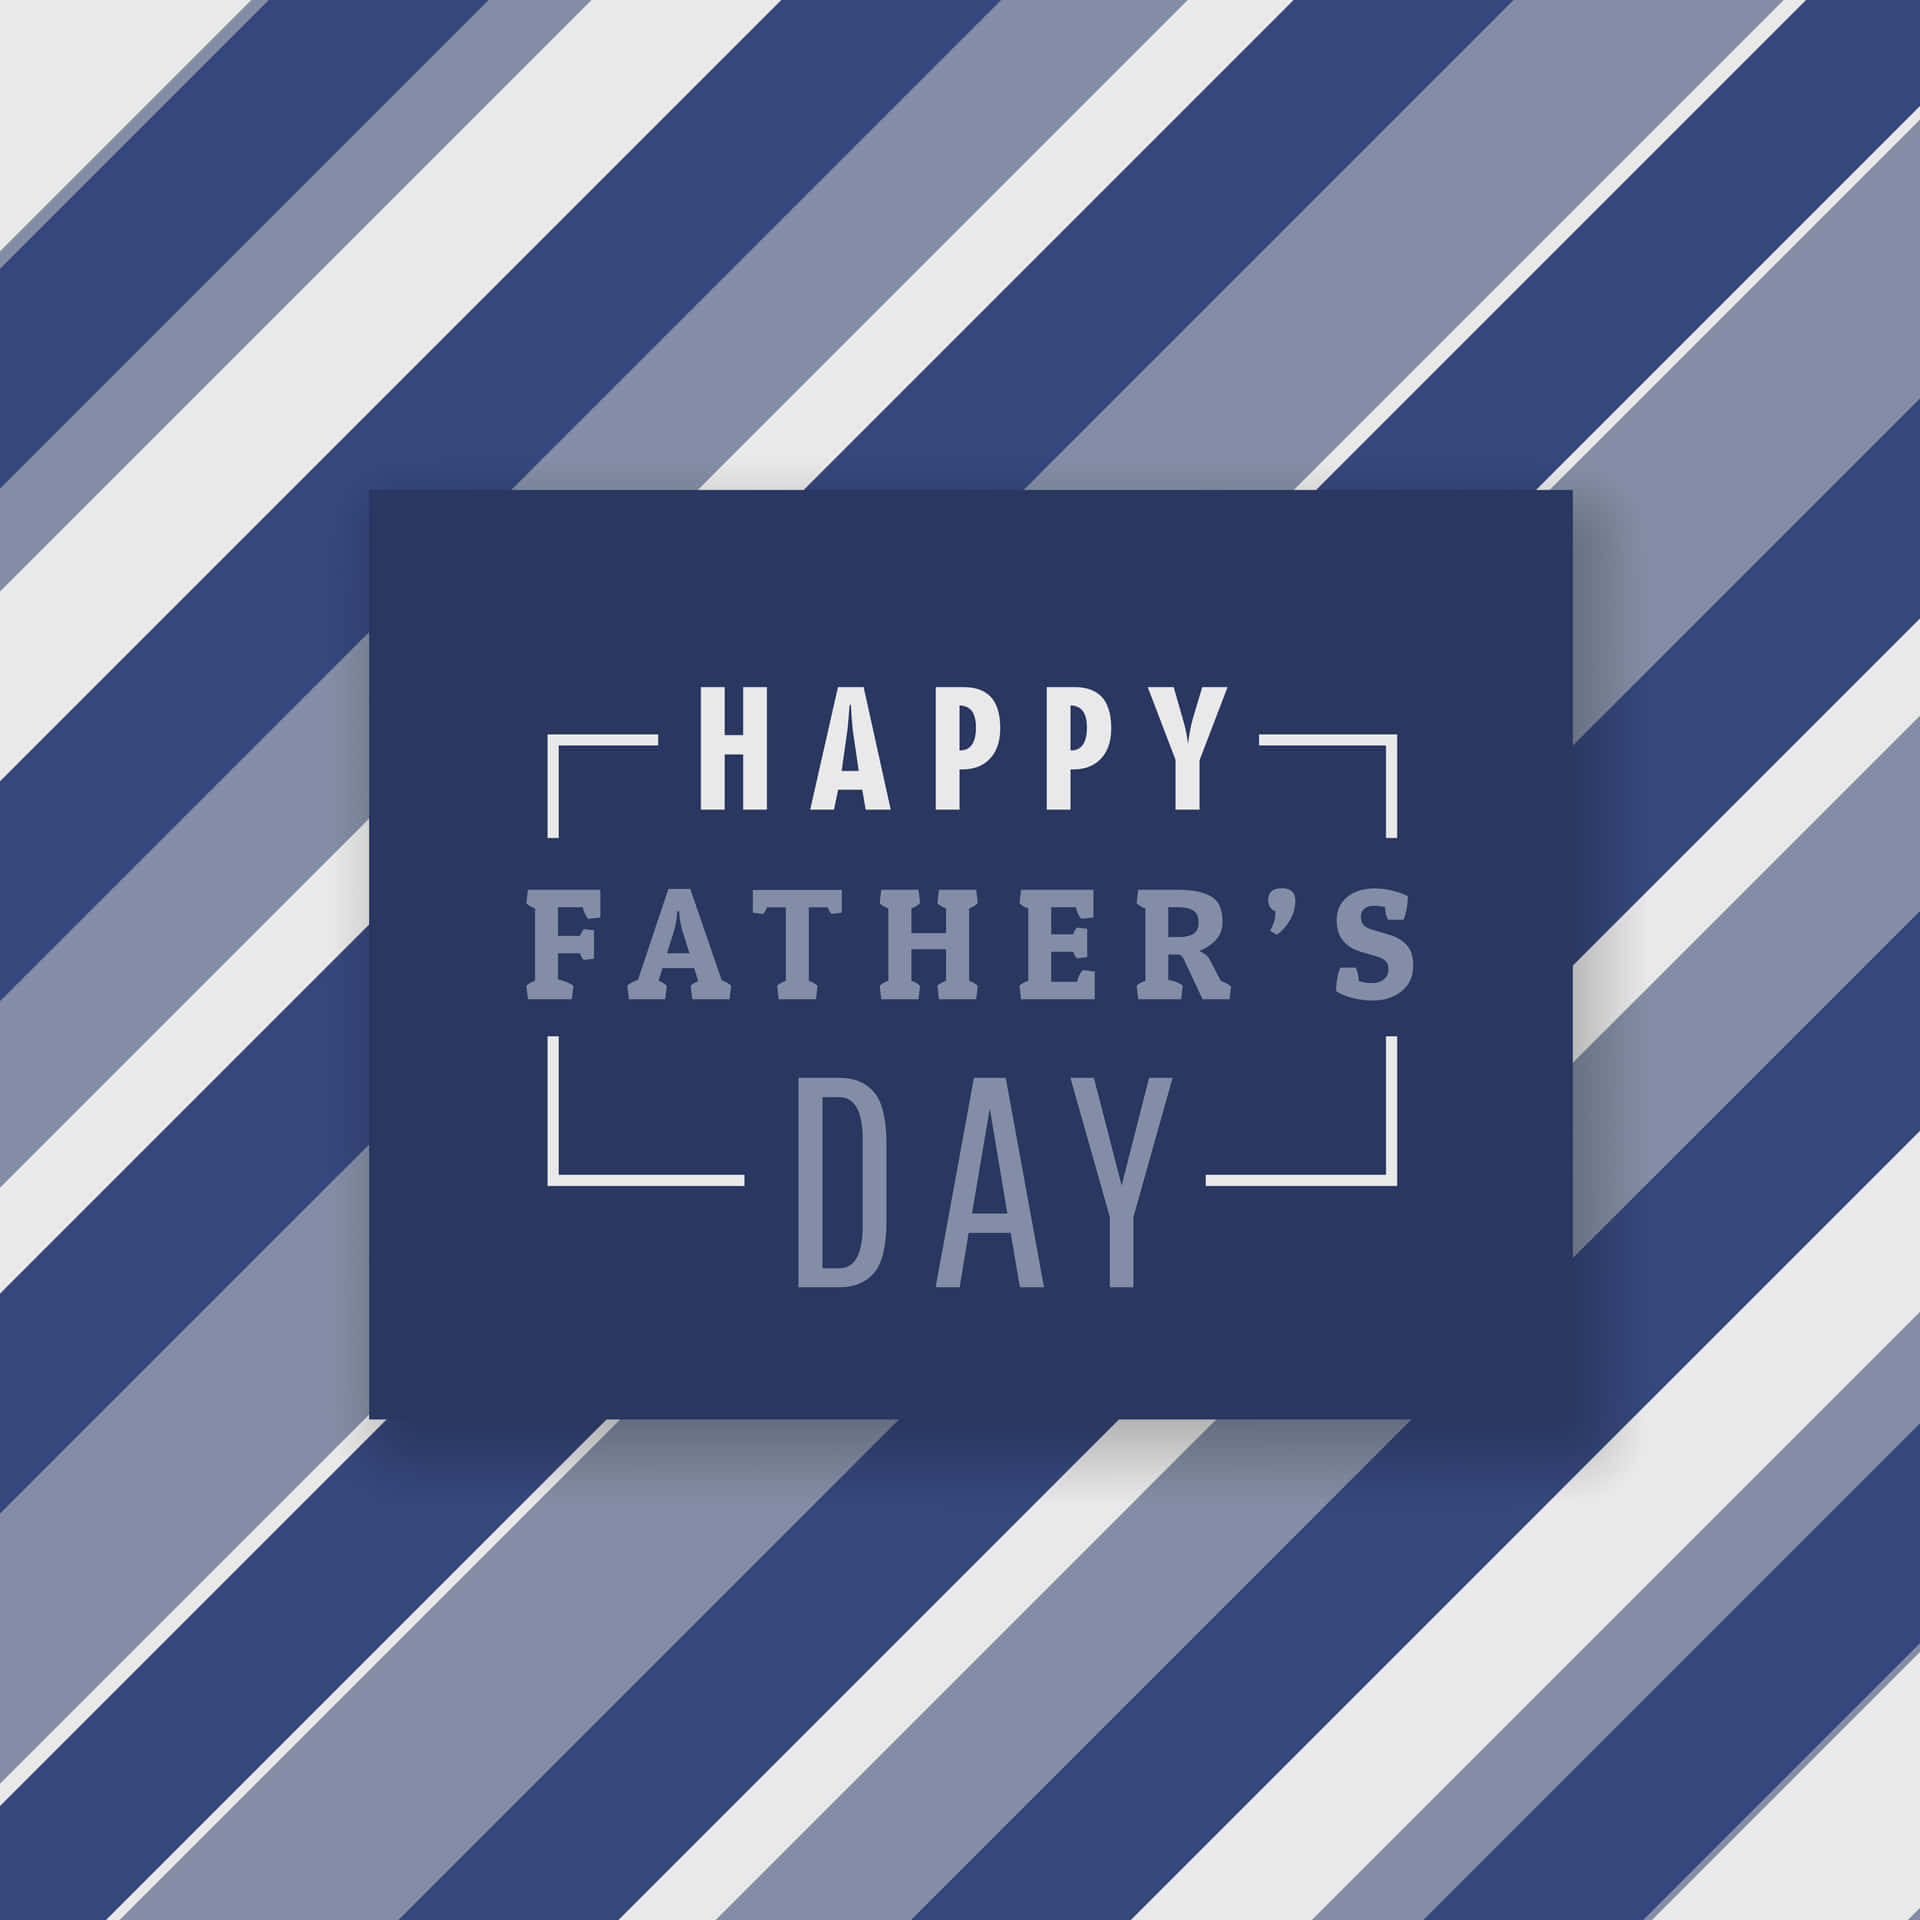 Happy Father's Day Card With Blue Stripes